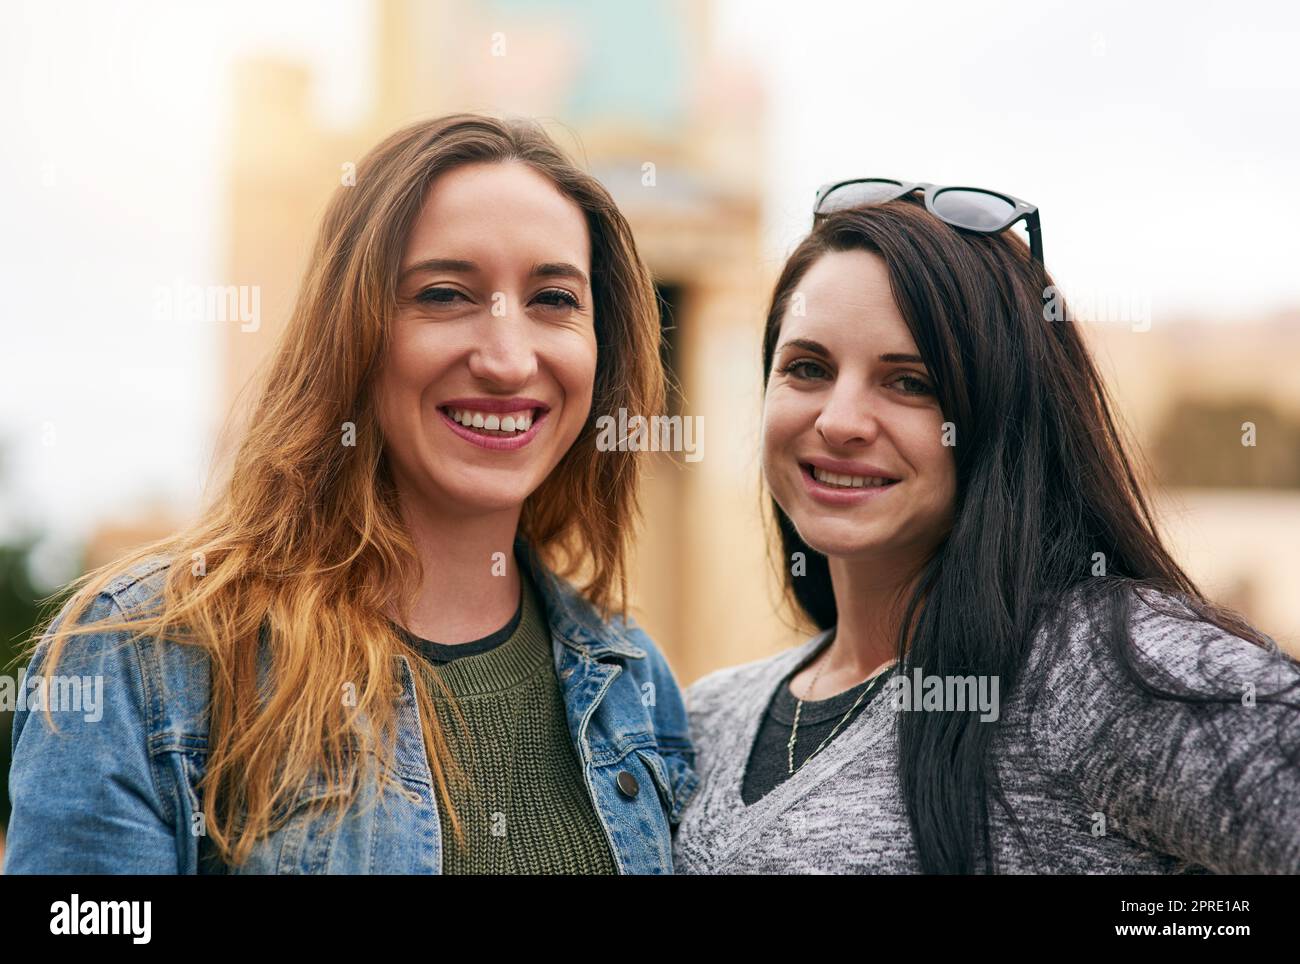 Two peas in a pod having fun out and about. Portrait of two female best friends at an amusement park outside. Stock Photo